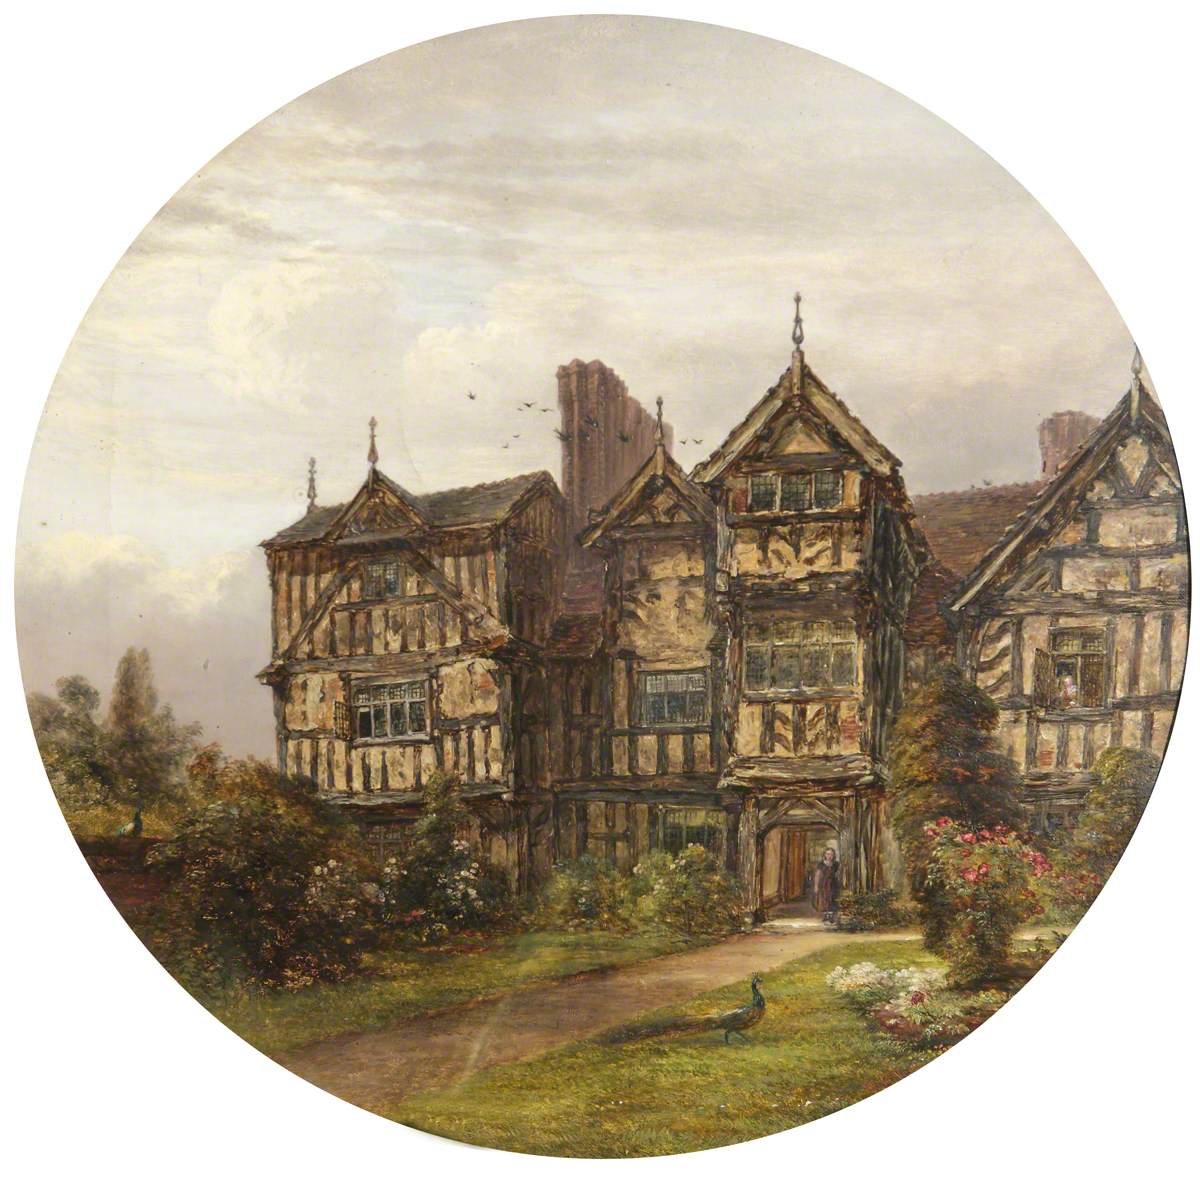 View of Moseley Old Hall